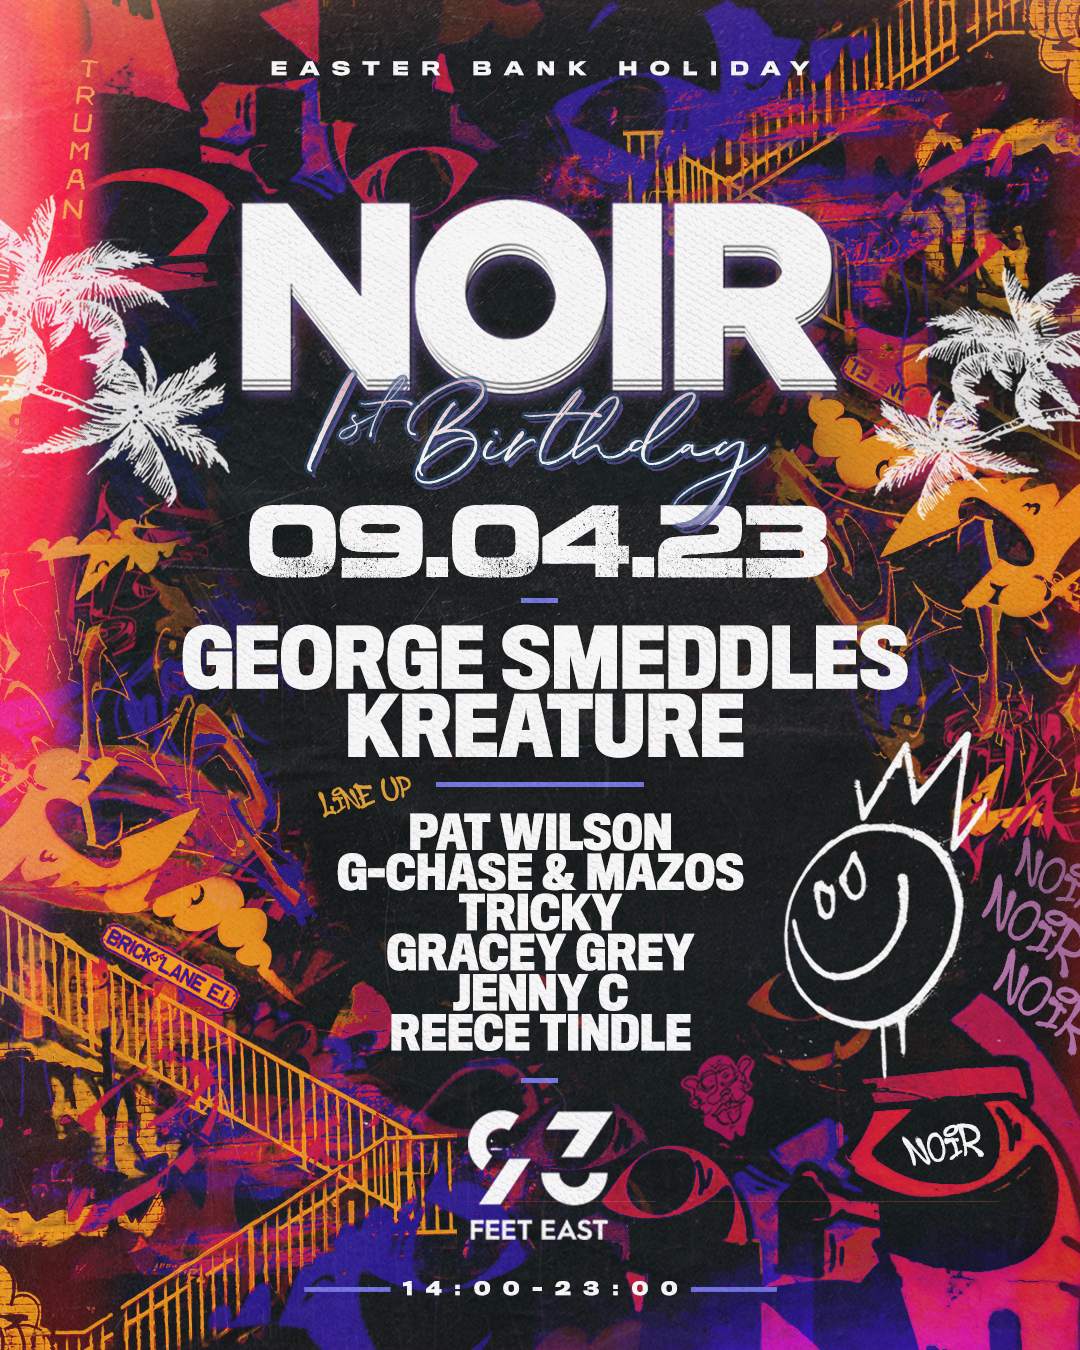 NOIR Easter Sunday w/George Smeddles, Kreature, Pat Wilson, Tricky + Residents - フライヤー裏